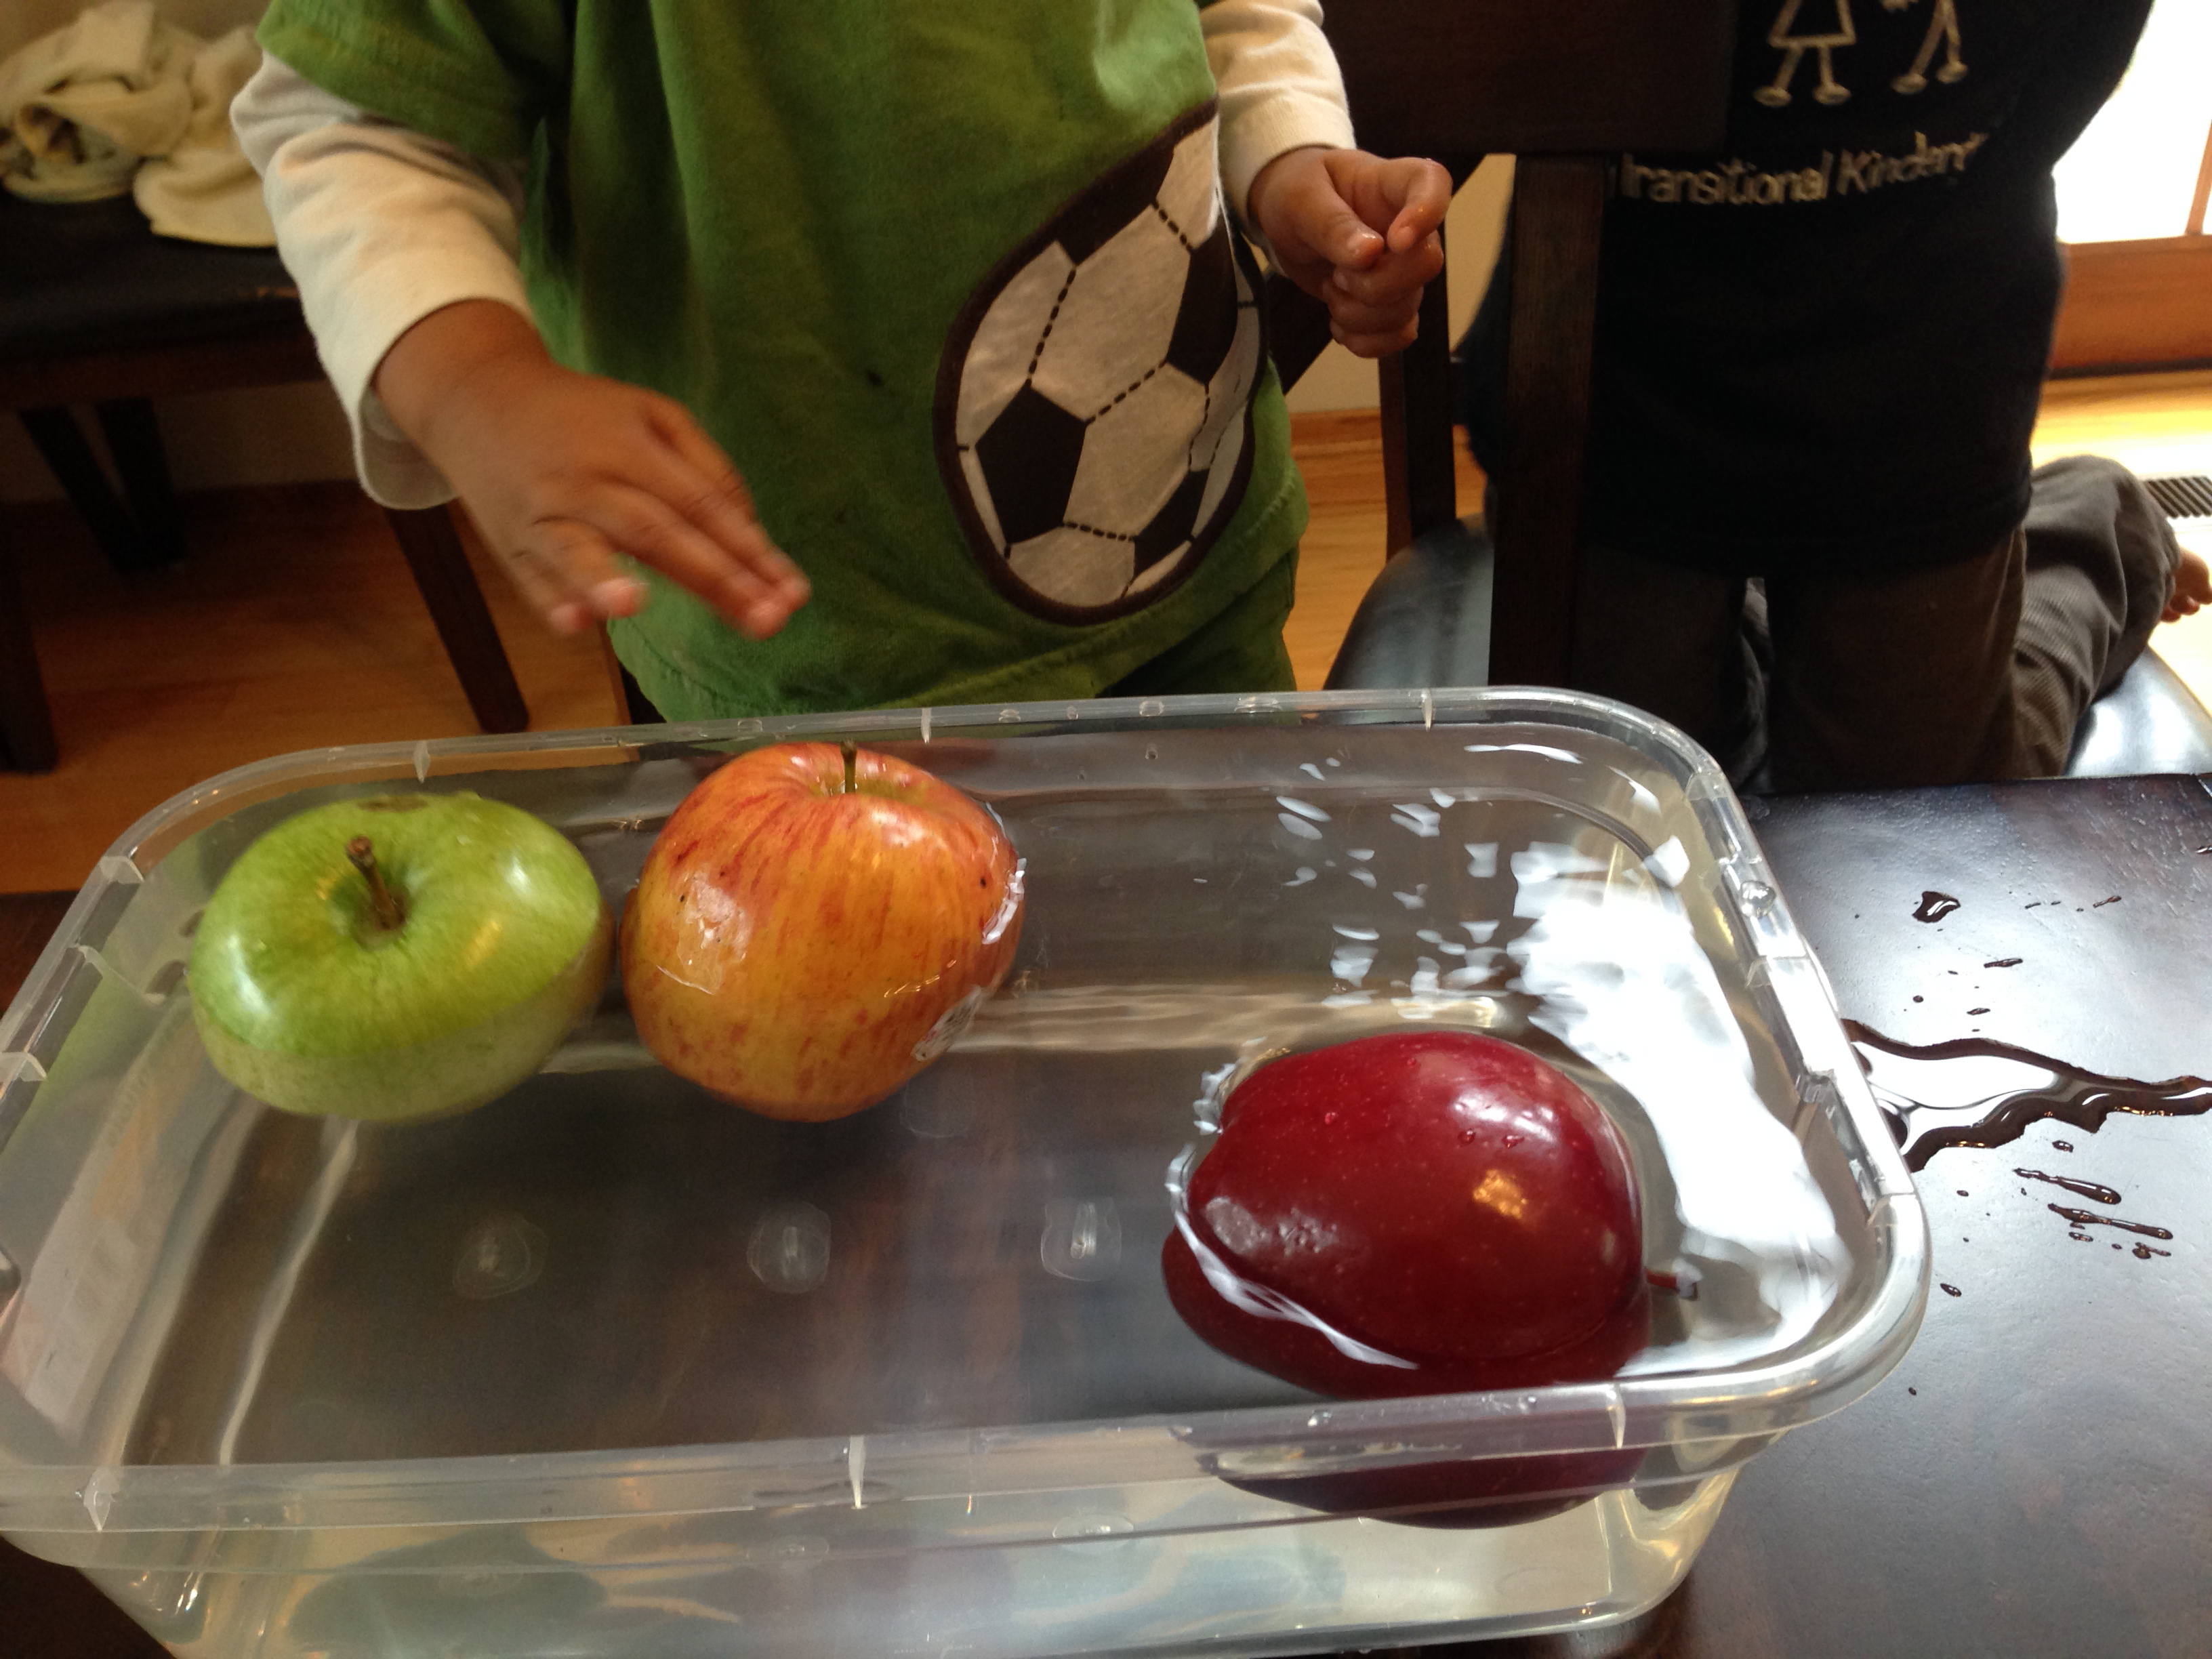 How Much Water Is in an Apple? Science Activity